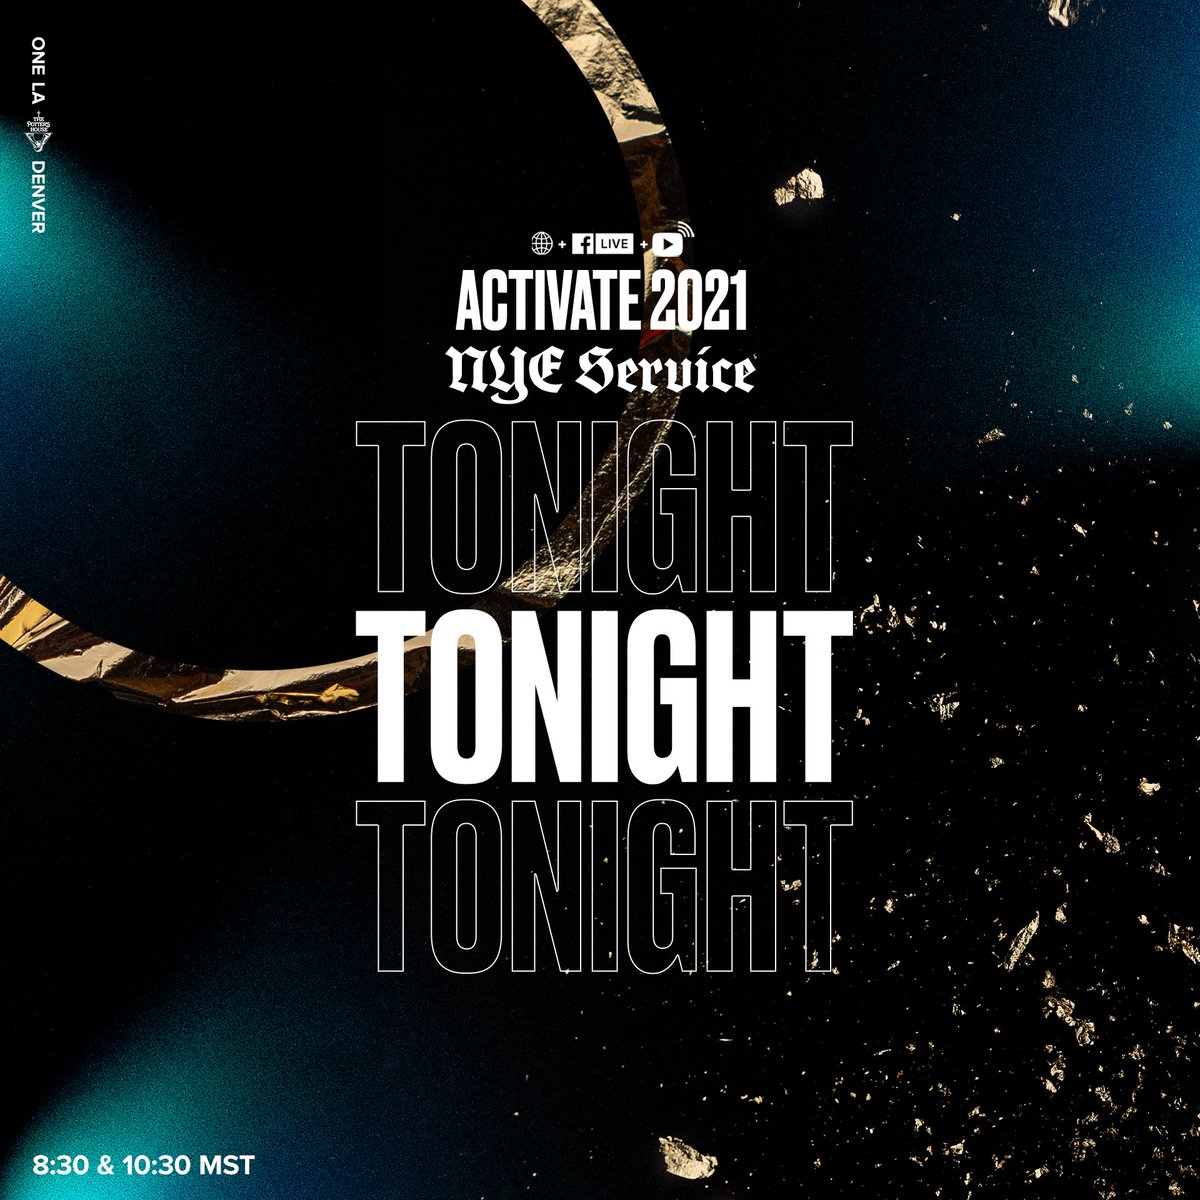 ✨ NYE w PT & PSJR ✨ __ TONIGHT, bring in the new year Kingdom style with Pastors @ToureRoberts and @SarahJakesRoberts in an unforgettable New Year’s Eve Activate Online Service! __ ✨ NYE x ACTIVATE ONLINE ✨ WHEN: 8:30pm & 10:30pm MST WHERE: YouTube, FB Live, & Our Website